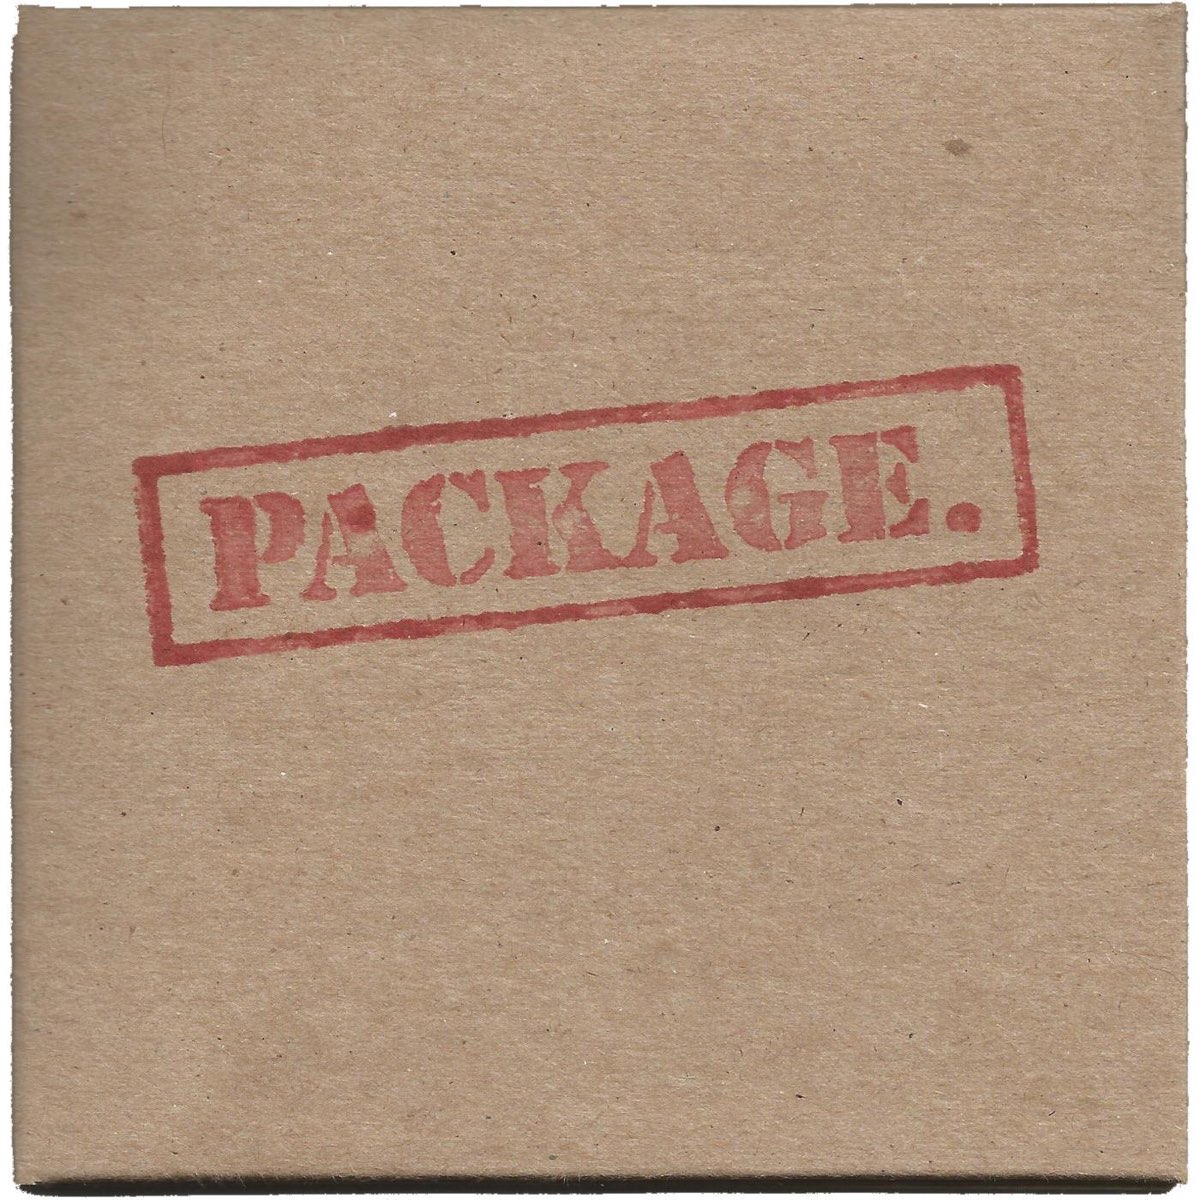 Package слово. Package word